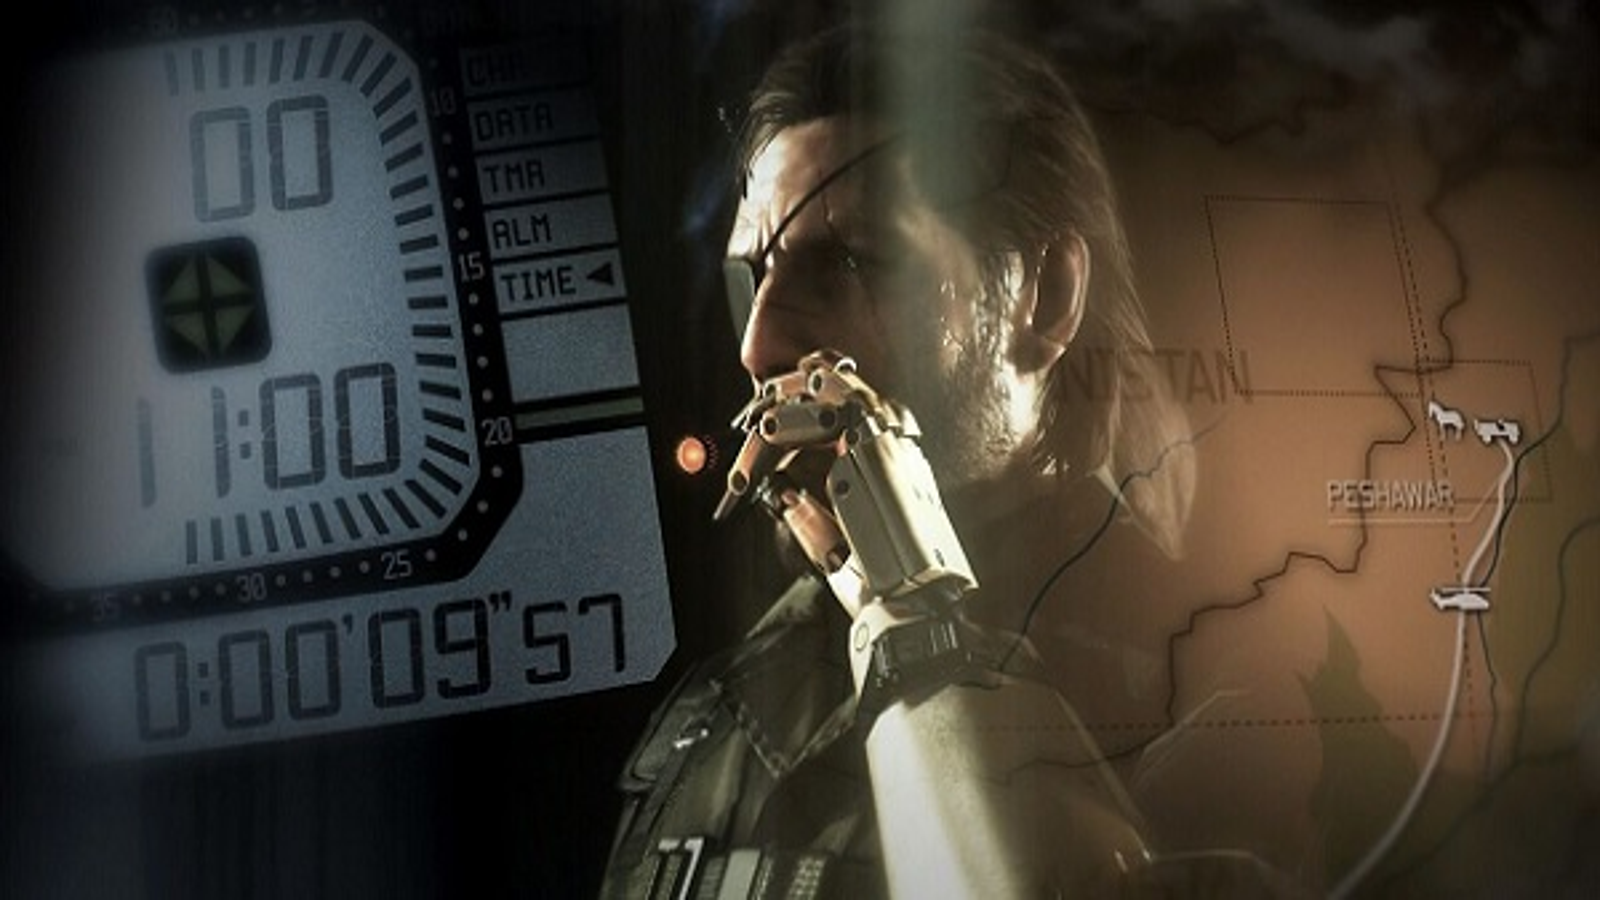 Metal Gear Solid 5: The Phantom Pain Review 